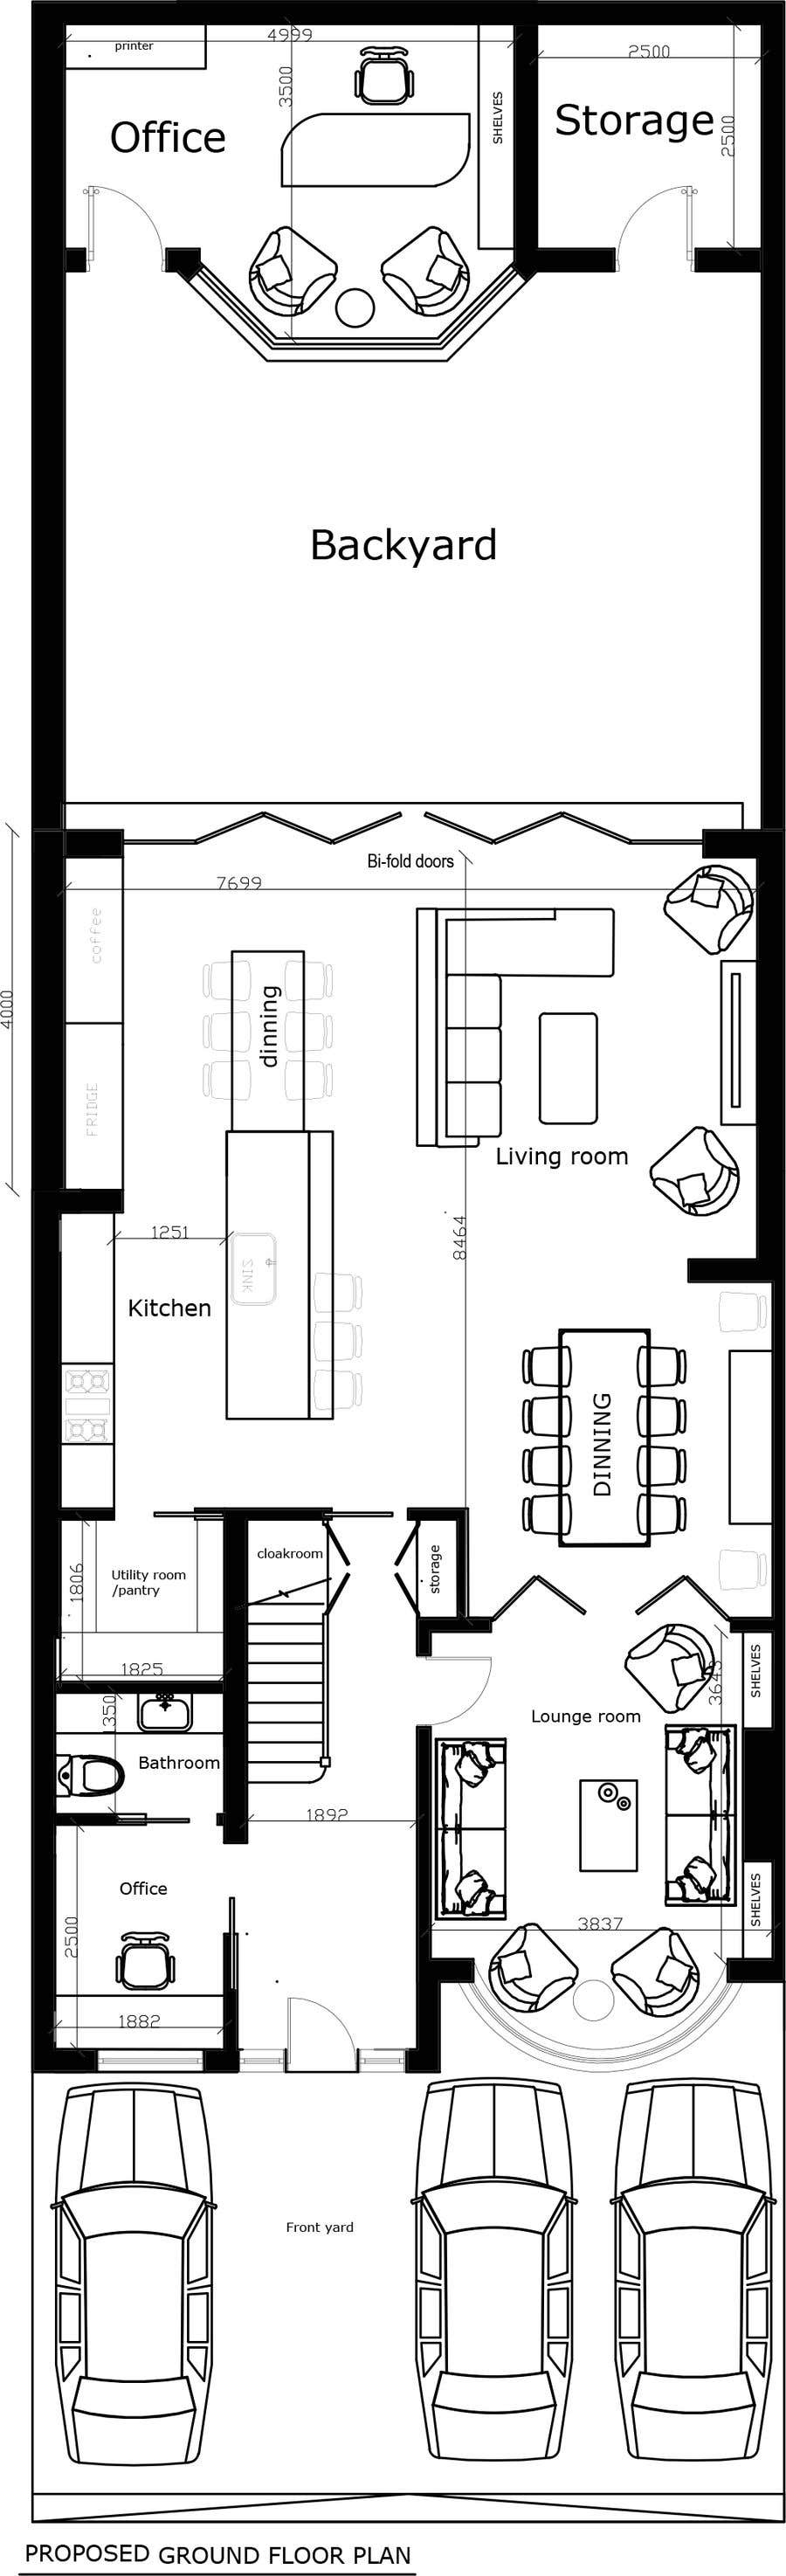 a floor plan of a house with bedrooms and baths and a garage